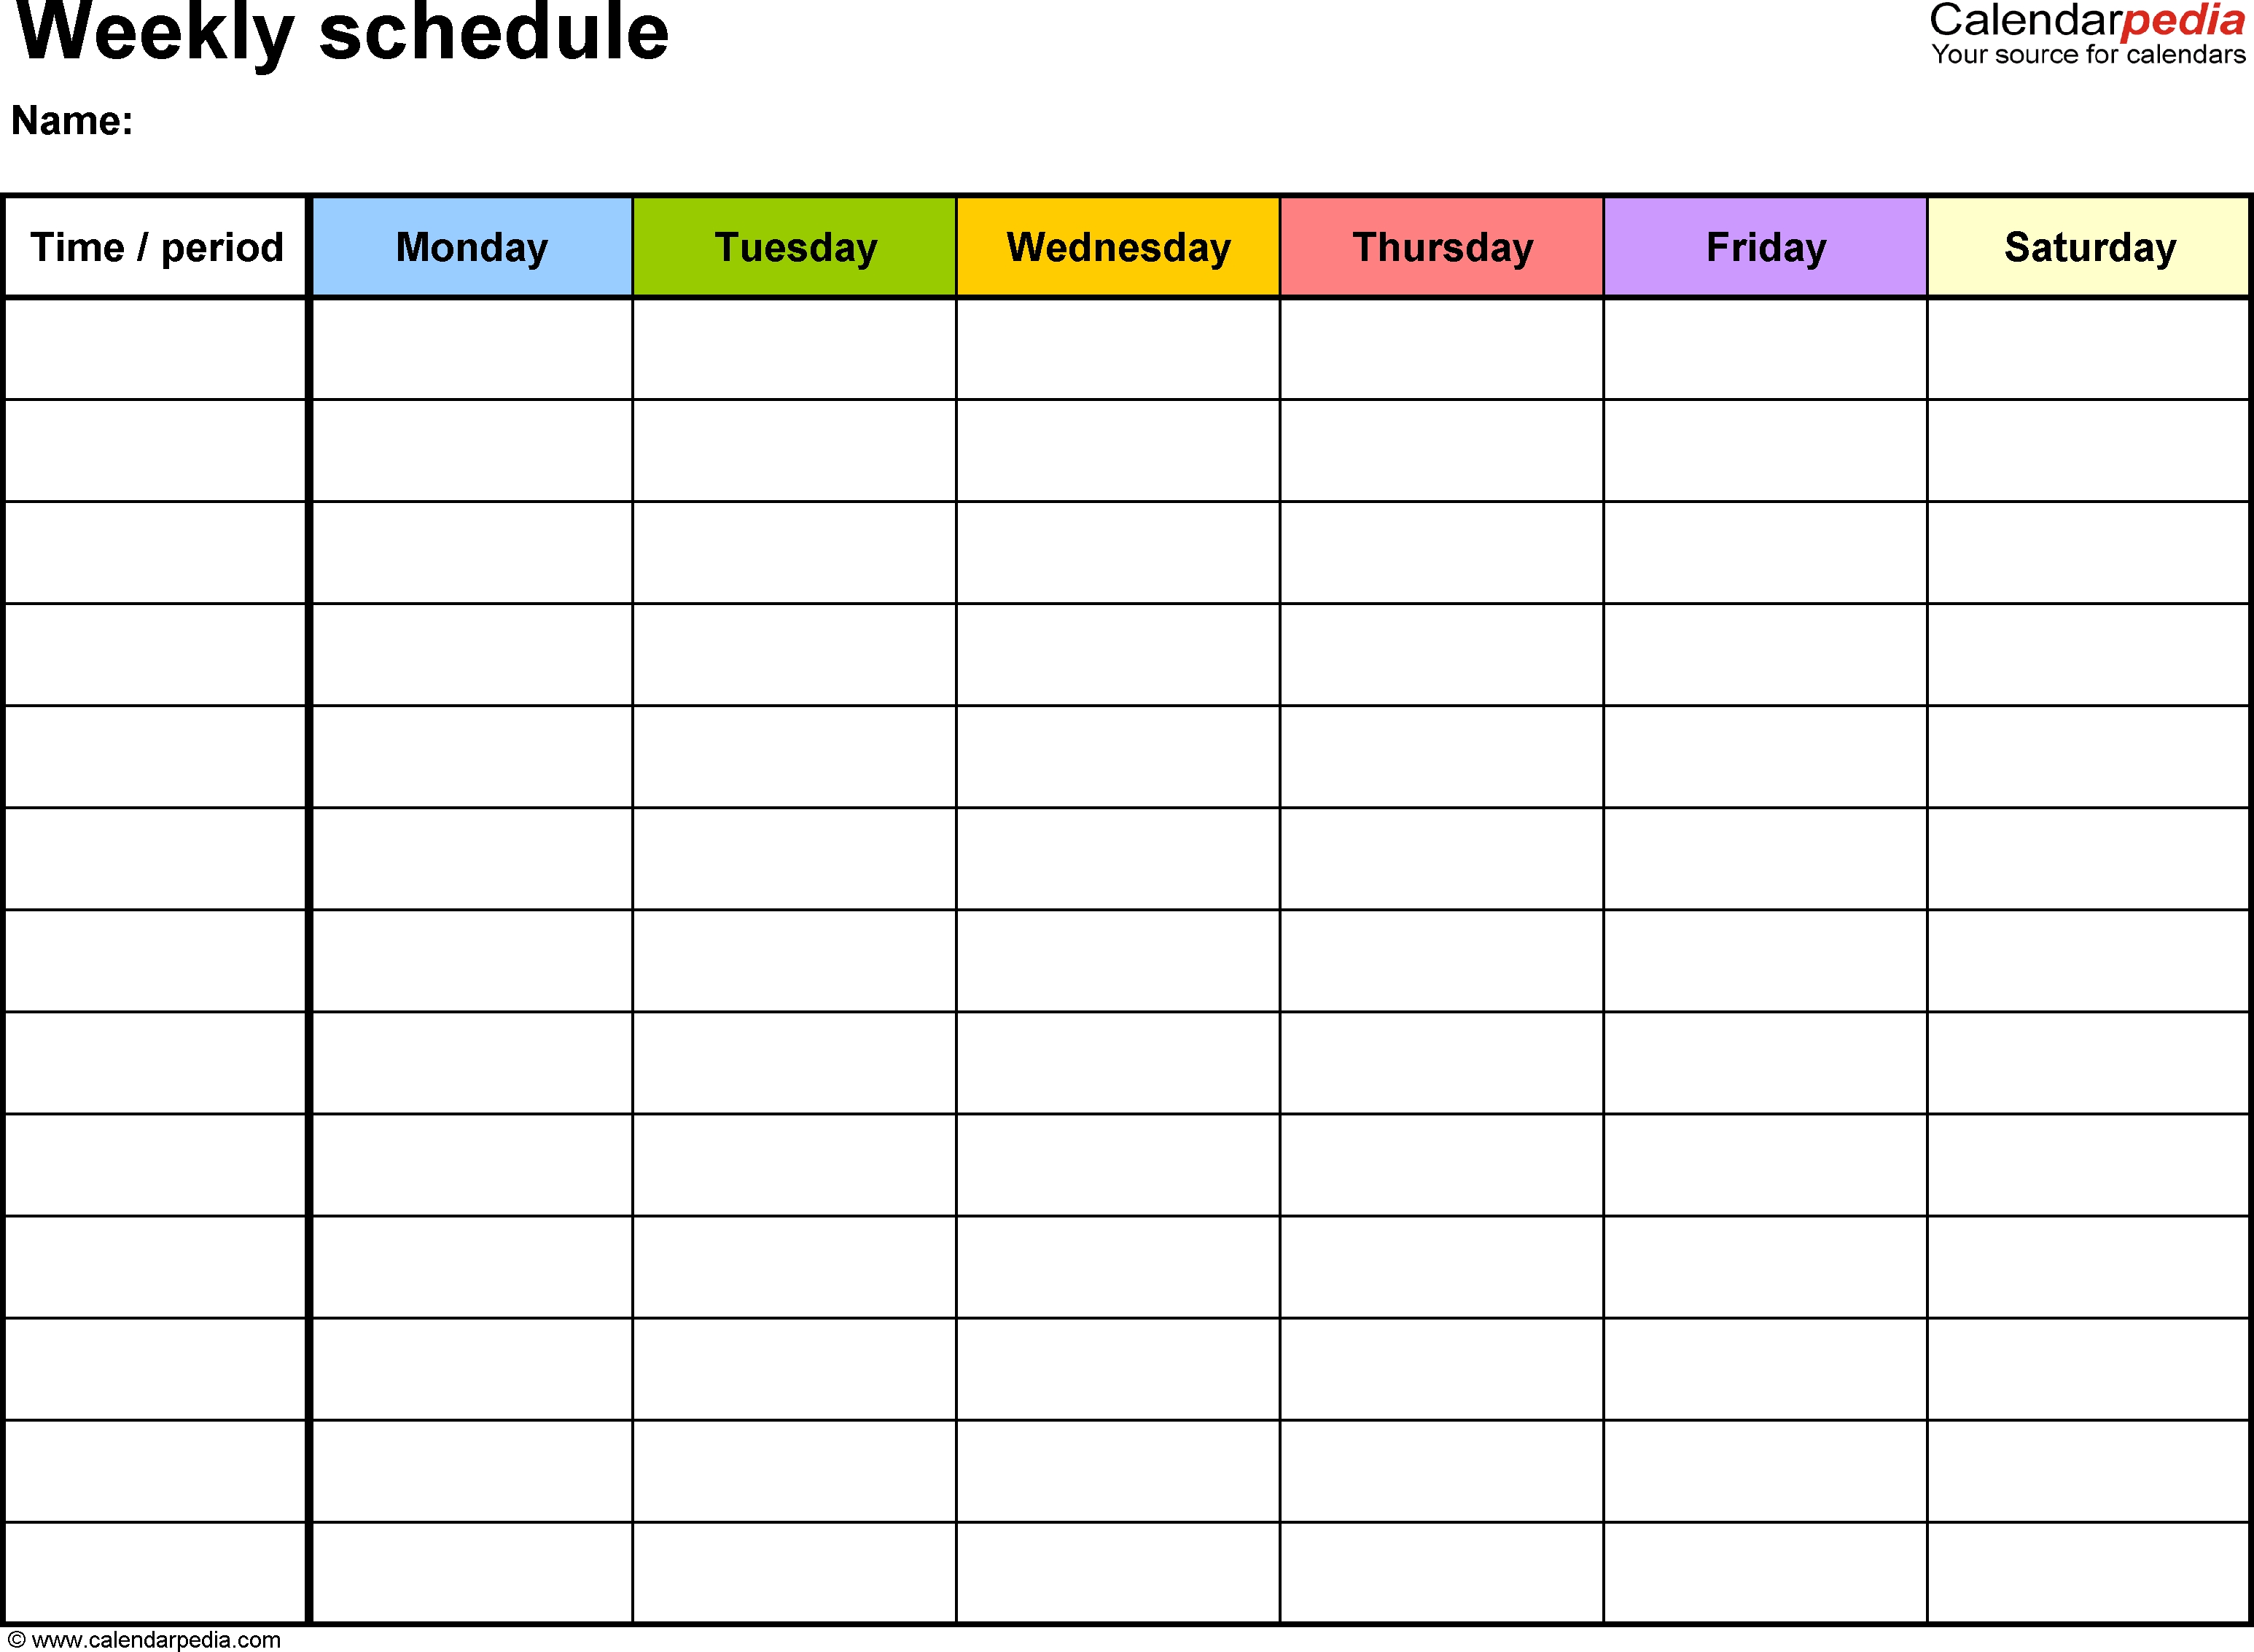 Free Weekly Schedule Templates For Word - 18 Templates-Monday To Friday Blank Calendar